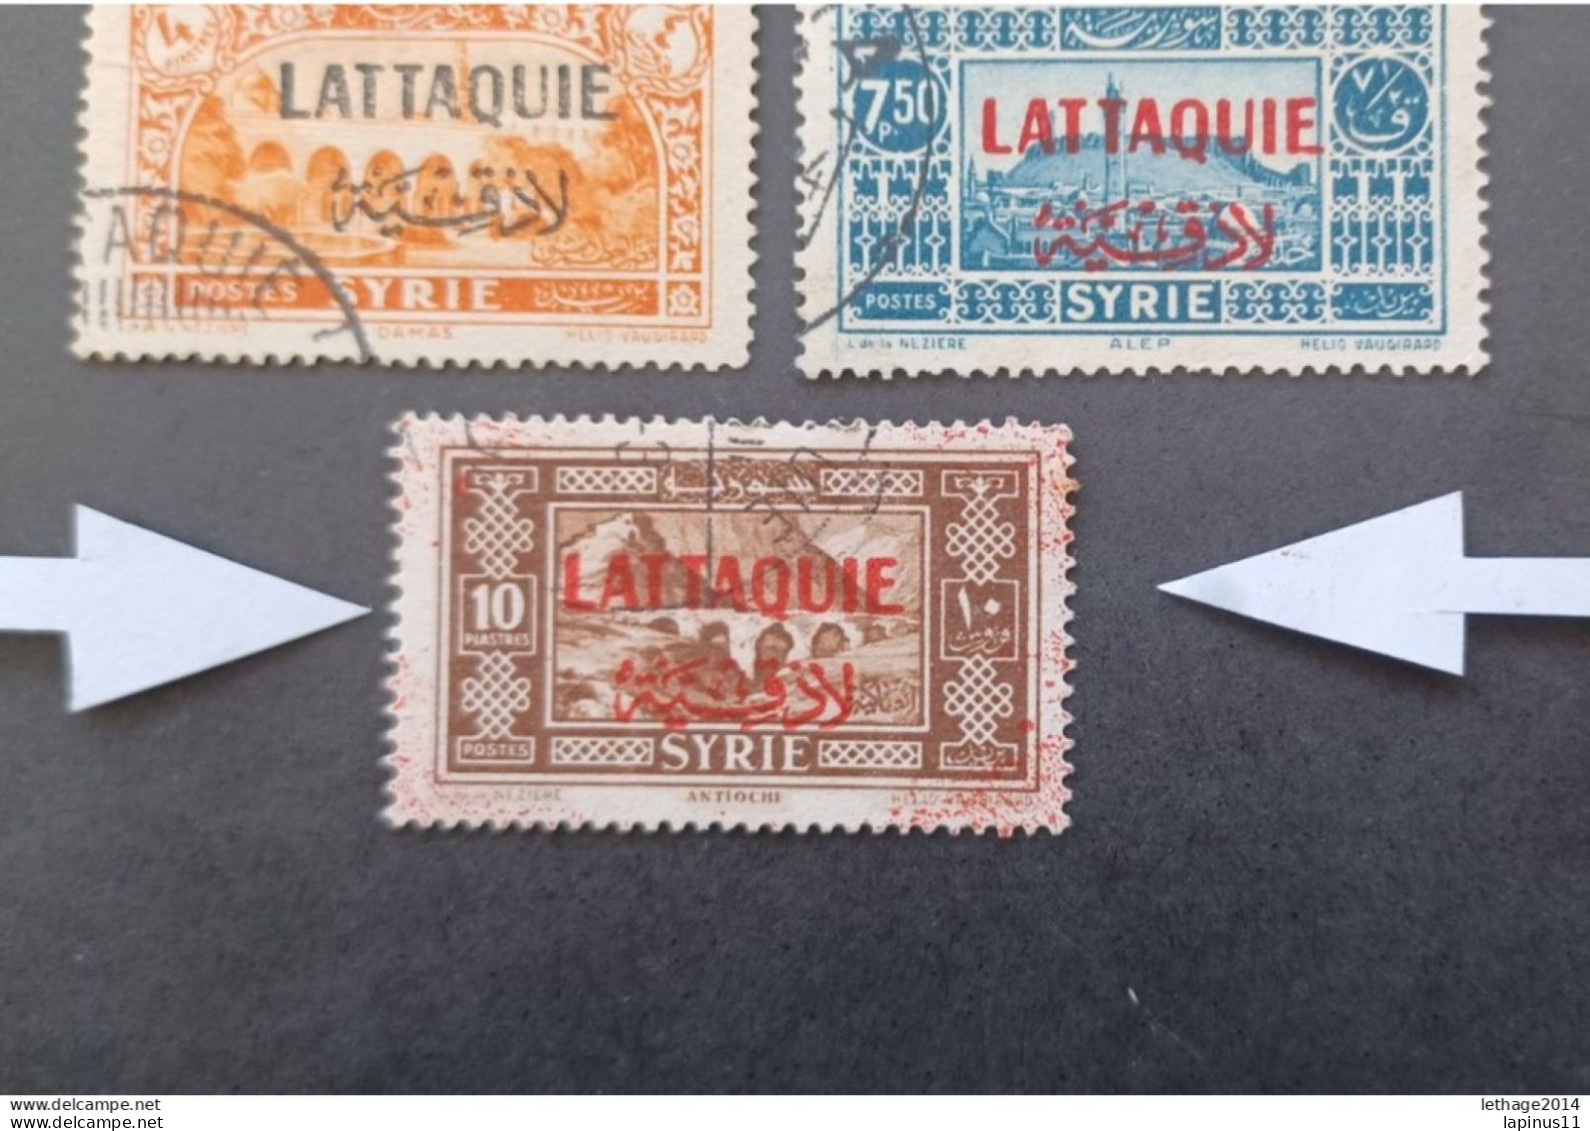 FRENCH OCCUPATION IN SYRIA LATTAQUIE 1940 STAMPS OF SYRIE DE 1930 IN OVERPRINT CAT YVERT N 1....15 RED STAINS - Gebruikt